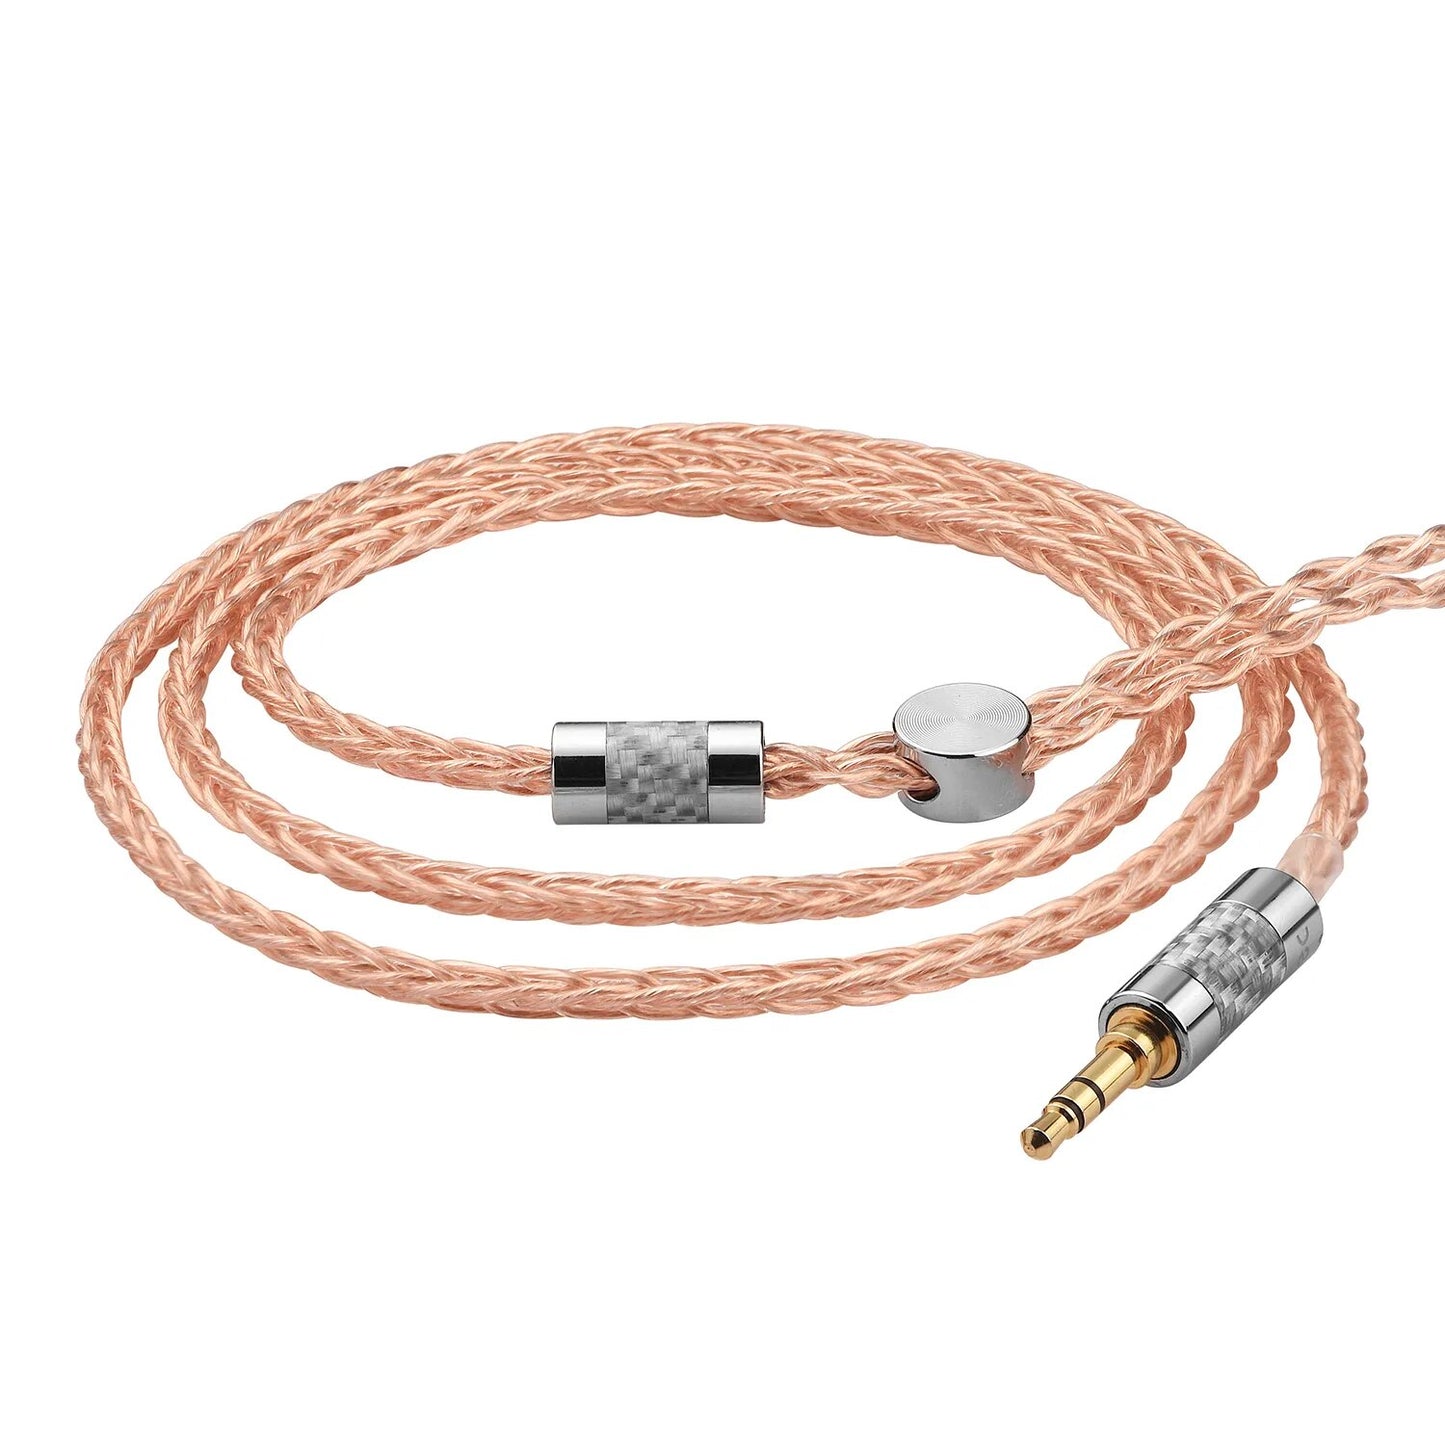 Astrotec 128 Cores 8 Strands 6N OCC Headphone Cable